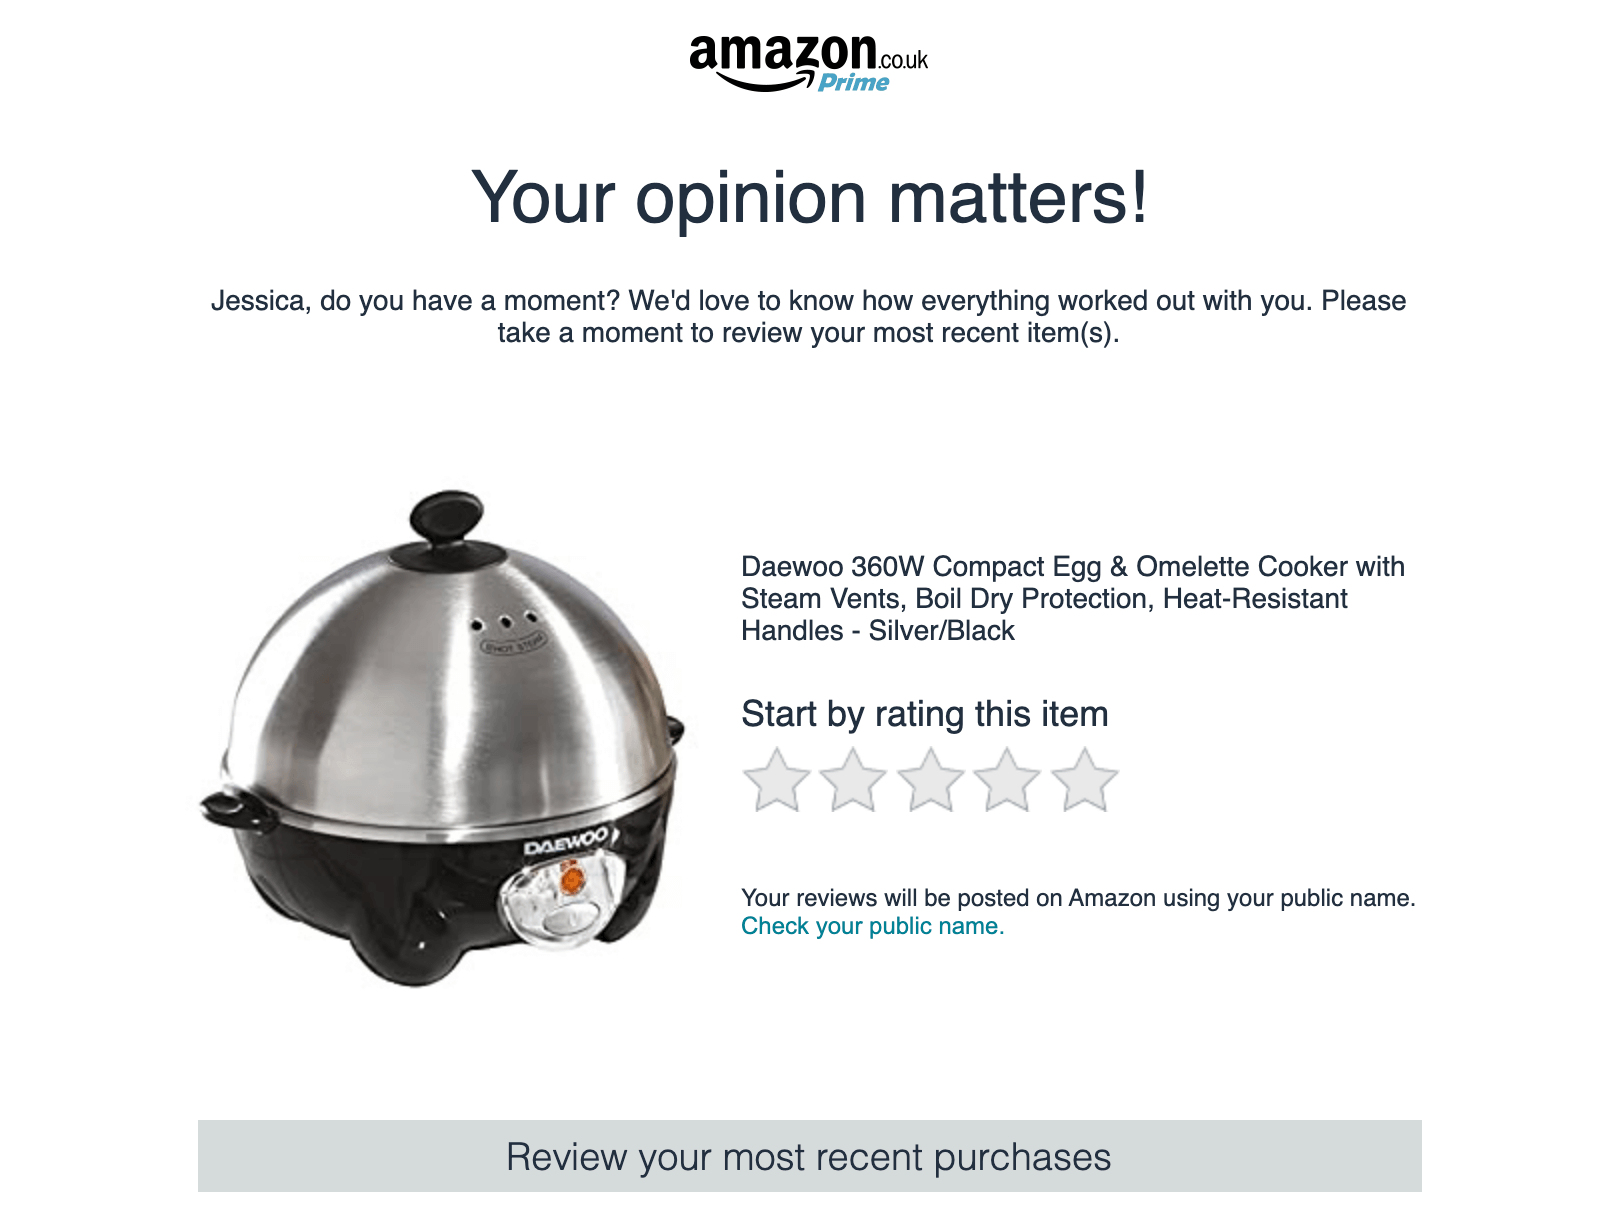 An Amazon email with a direct link to view a product.